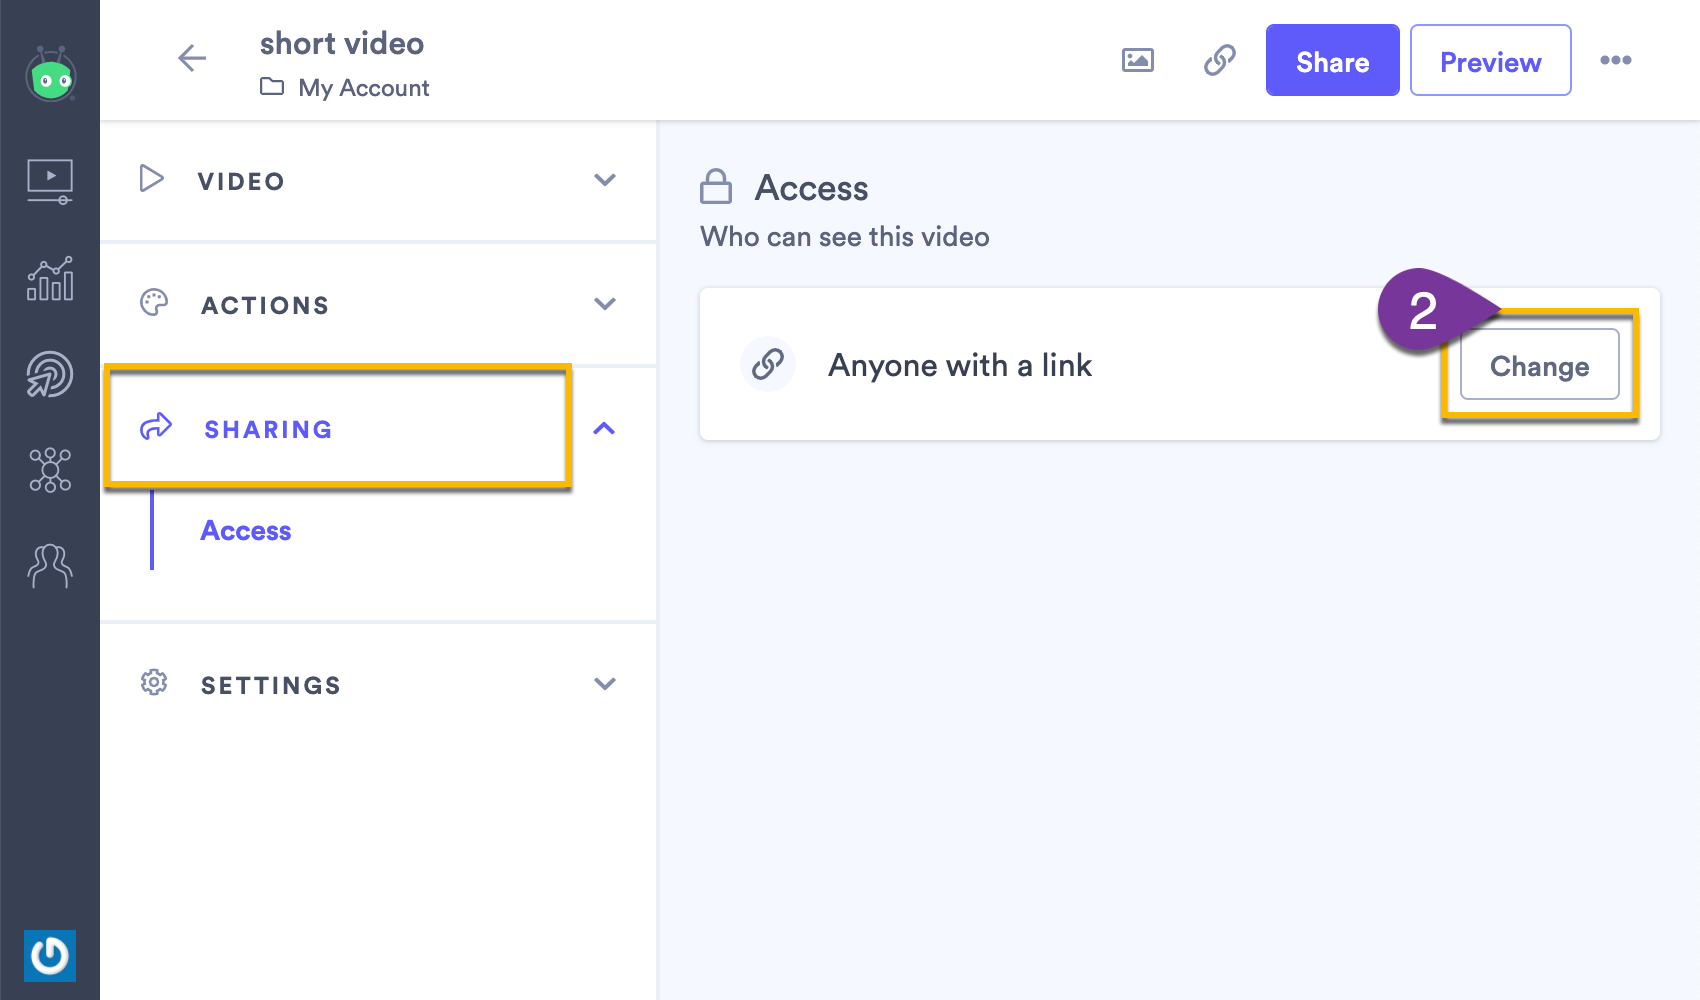 Selecting Sharing, then the Change button to edit the video's access settings